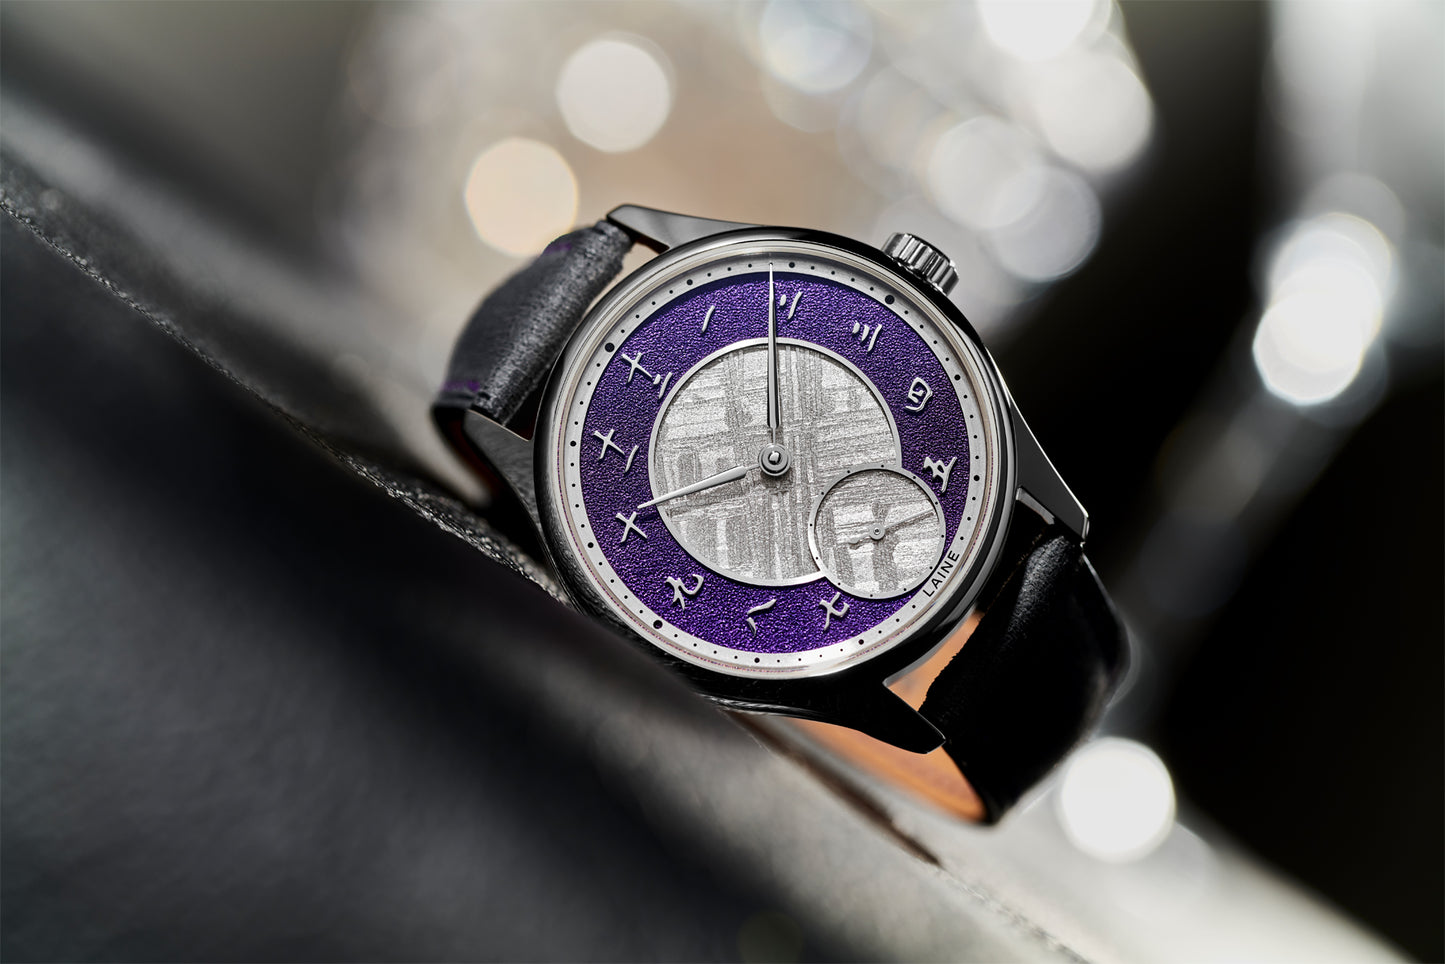 Laine x Revolution Purple Dial Frosted with Meteorite Center "One Love" (Chinese)